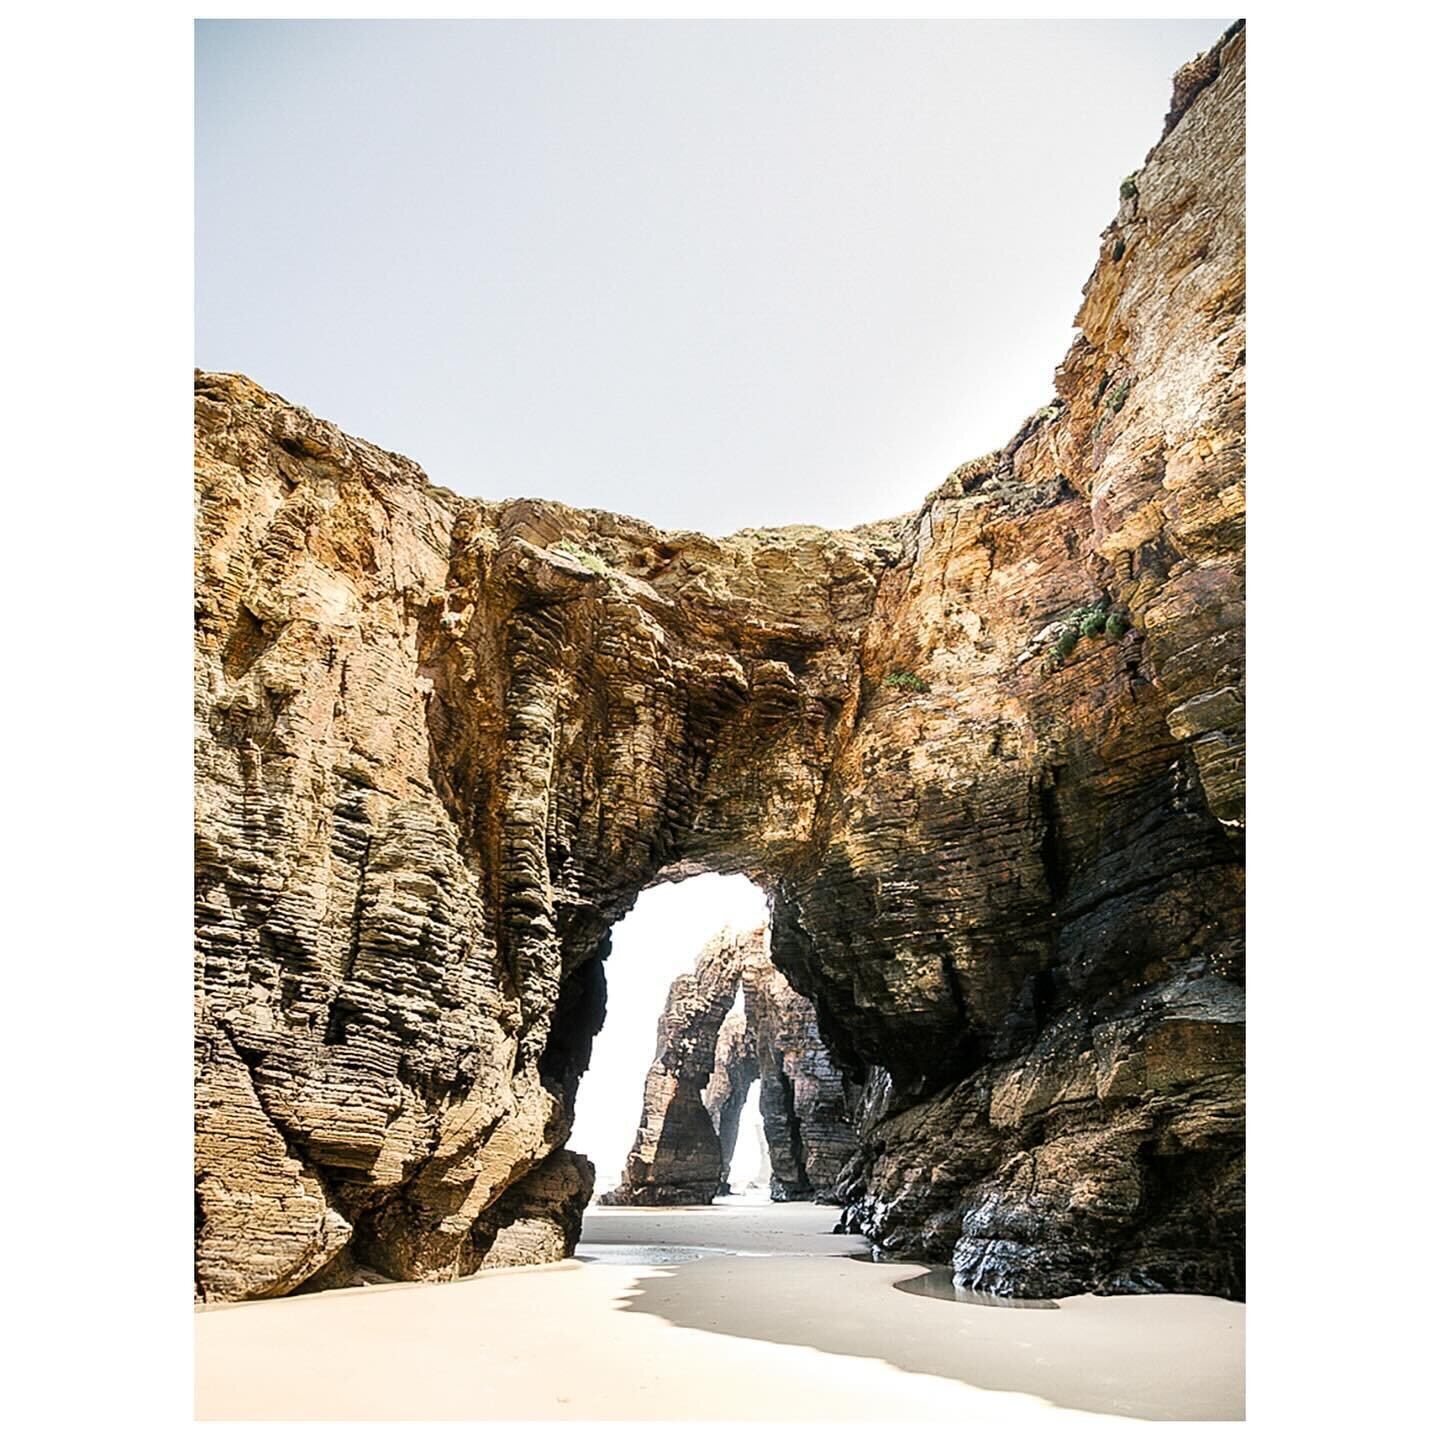 I'm currently rummaging through my old hard drives and taking a little trip down memory lane. This pic is from Playa de las Catedrales in Spain. After spotting these epic rock arches on Pinterest, we realised they were just a 6-hour drive away &ndash